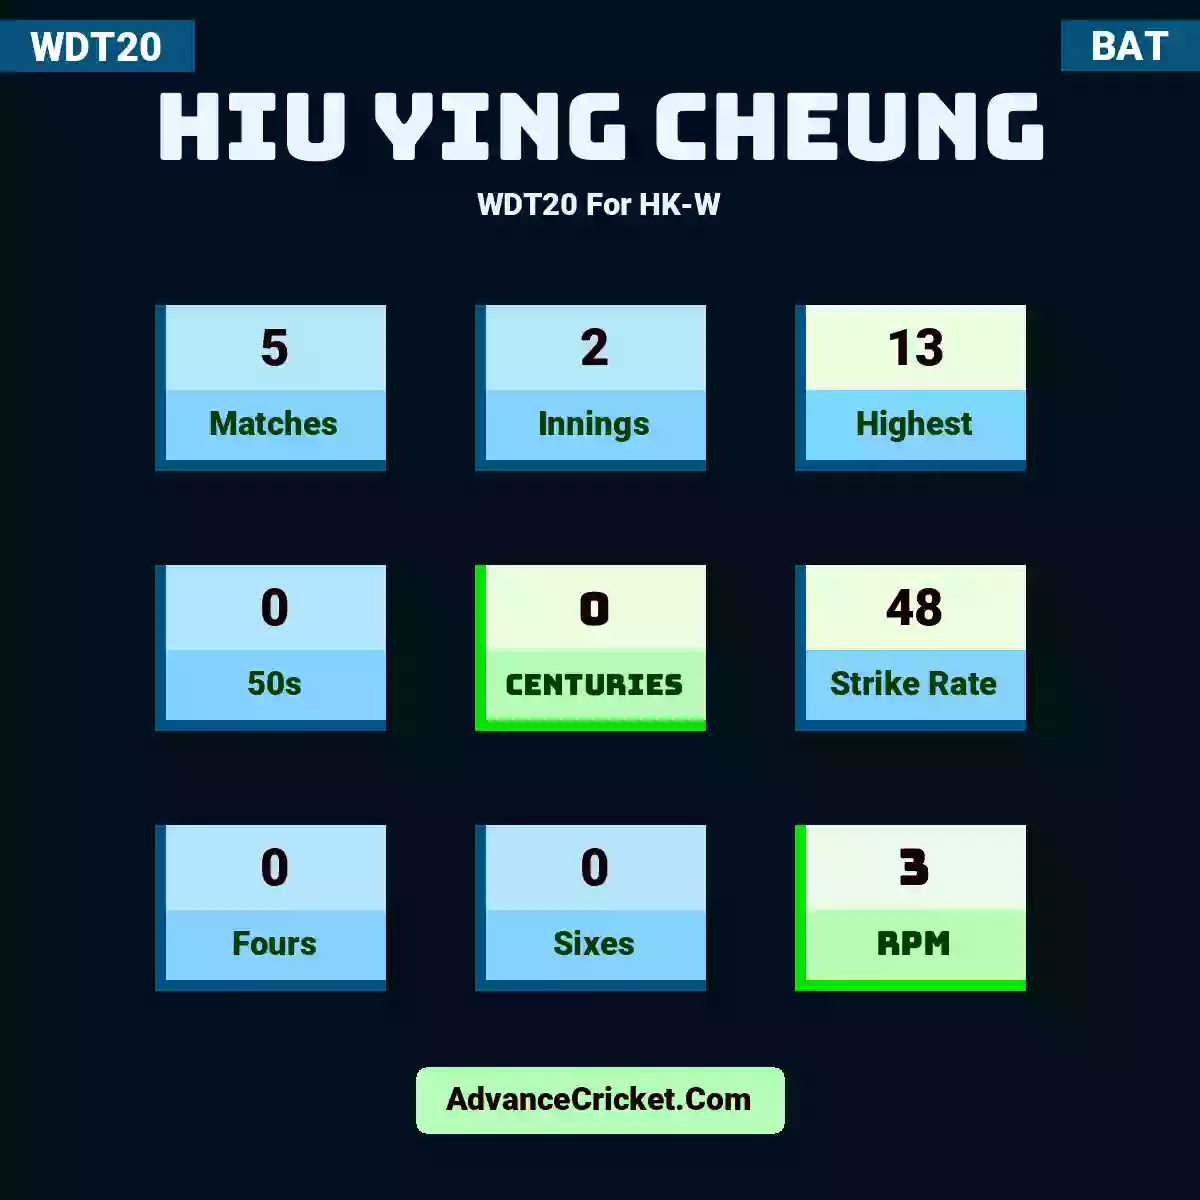 Hiu Ying Cheung WDT20  For HK-W, Hiu Ying Cheung played 5 matches, scored 13 runs as highest, 0 half-centuries, and 0 centuries, with a strike rate of 48. H.YCheung hit 0 fours and 0 sixes, with an RPM of 3.